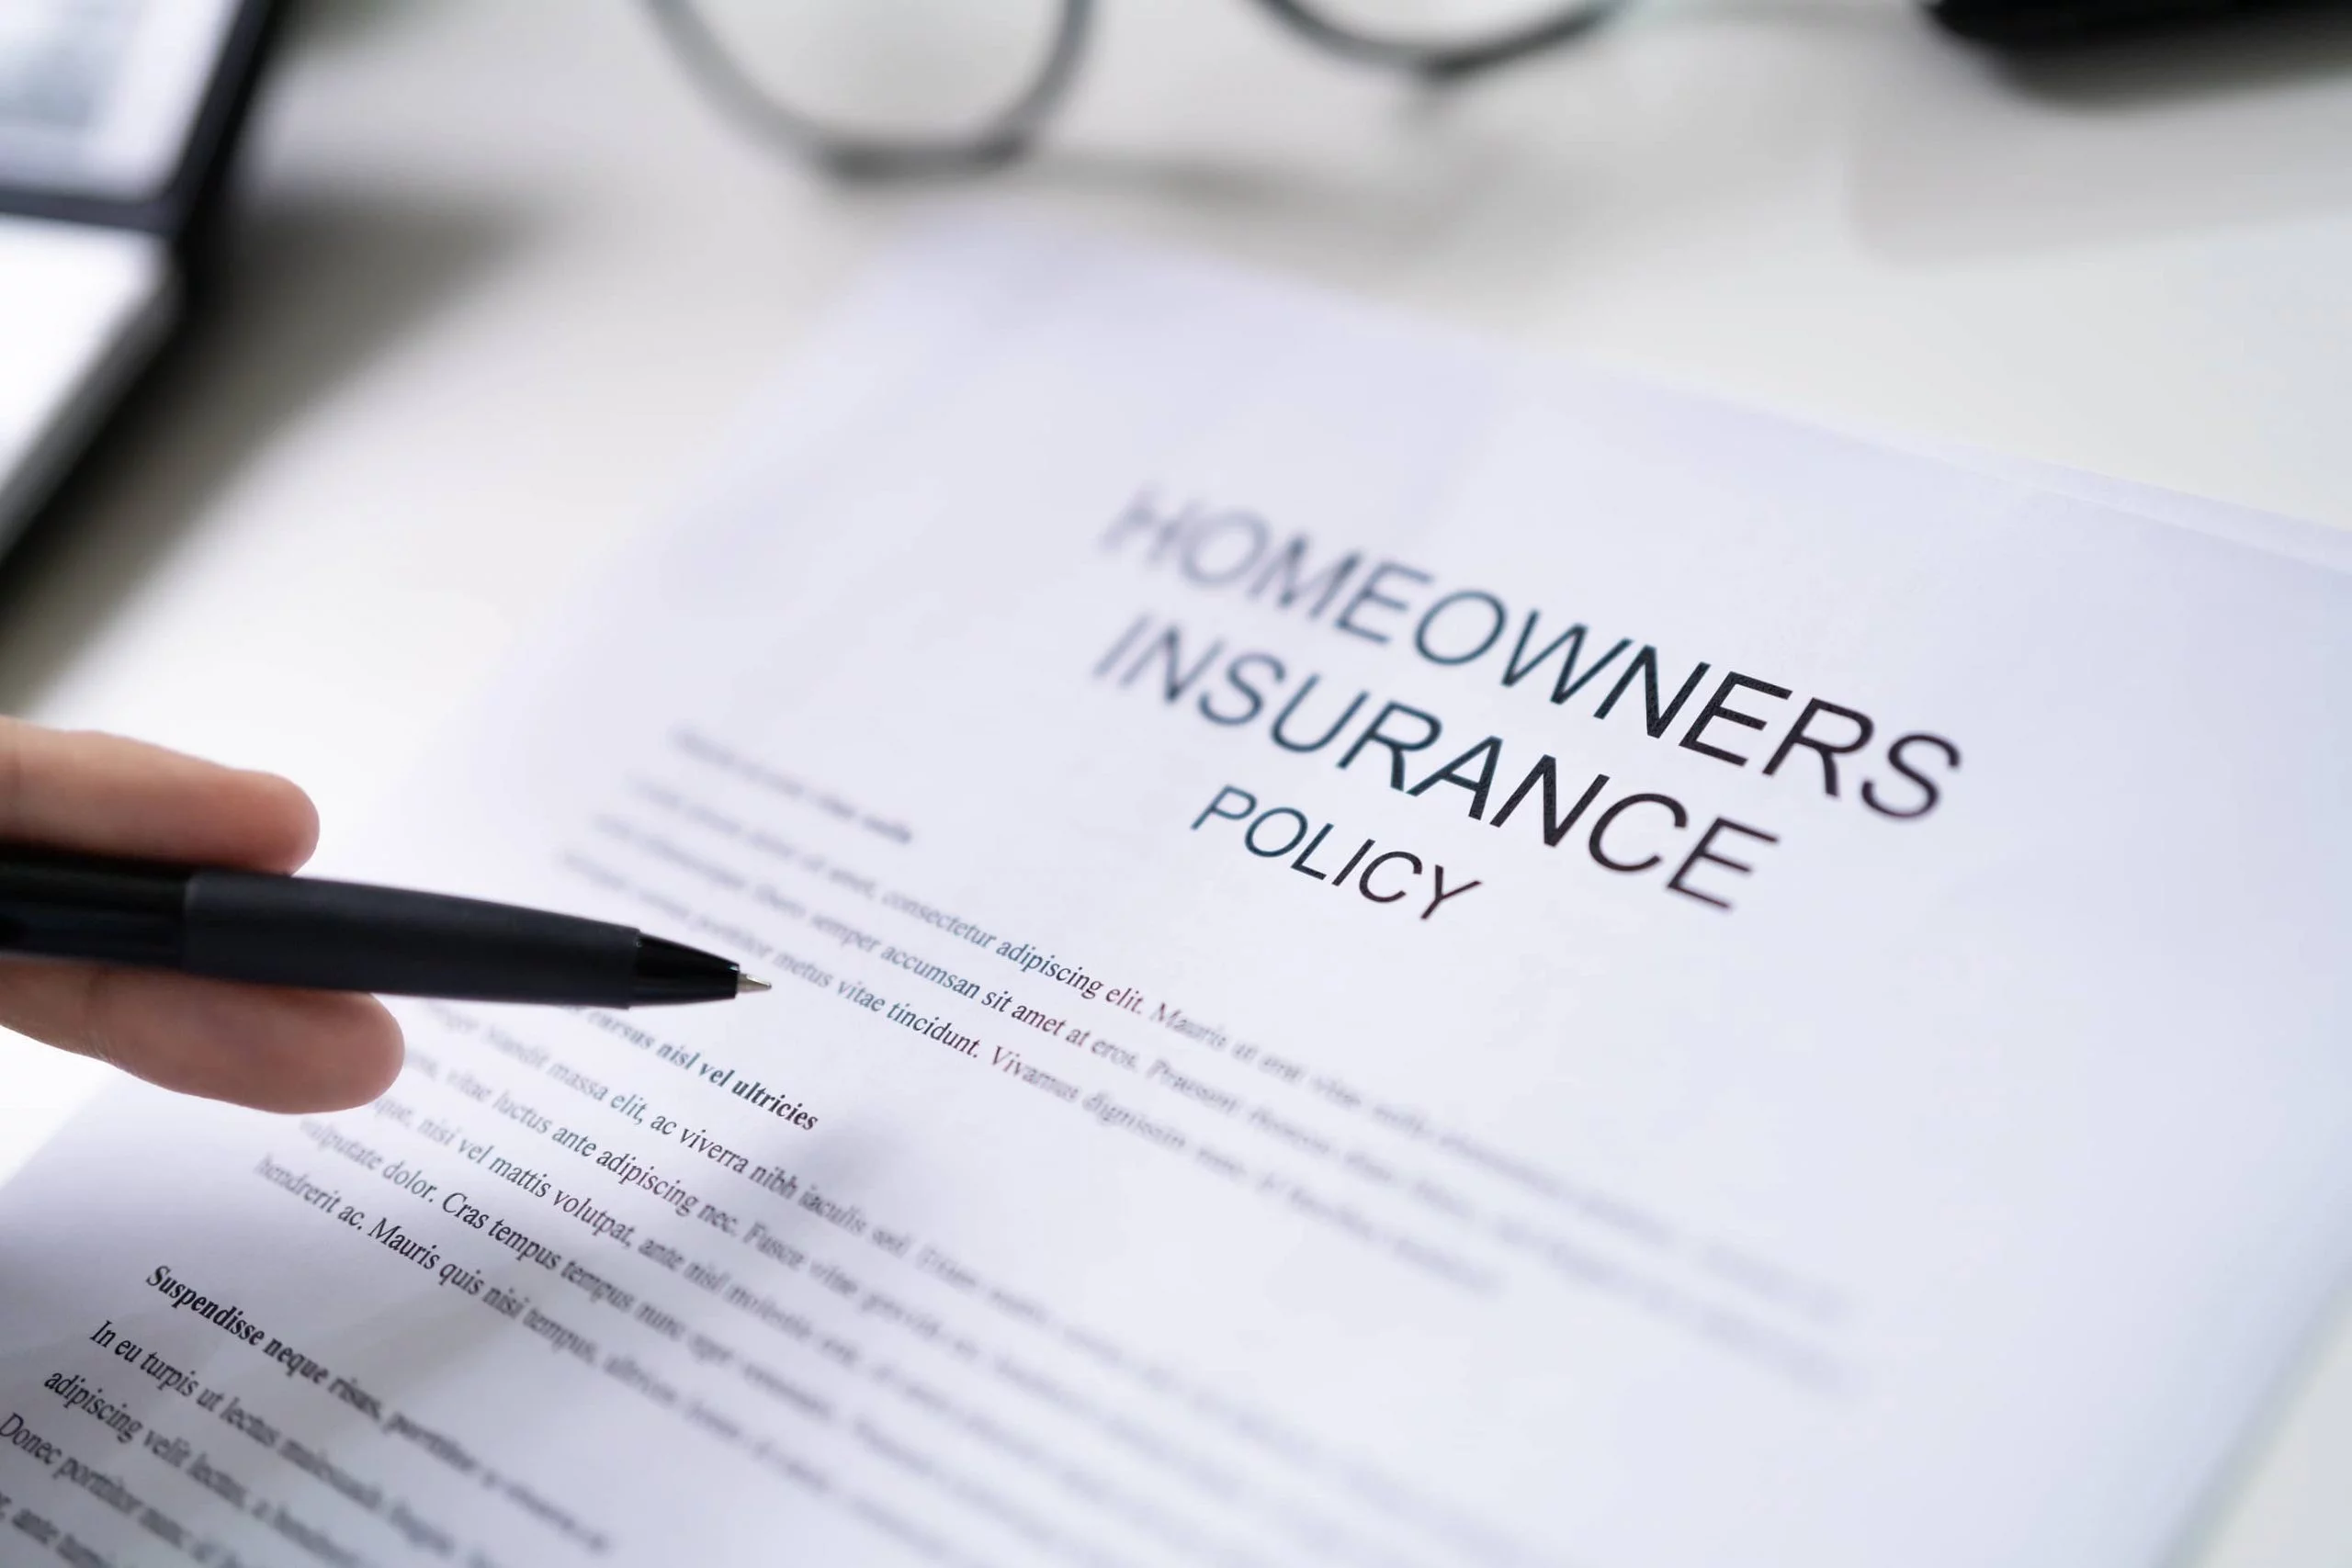 Homeowners Insurance Policies: What To Look For